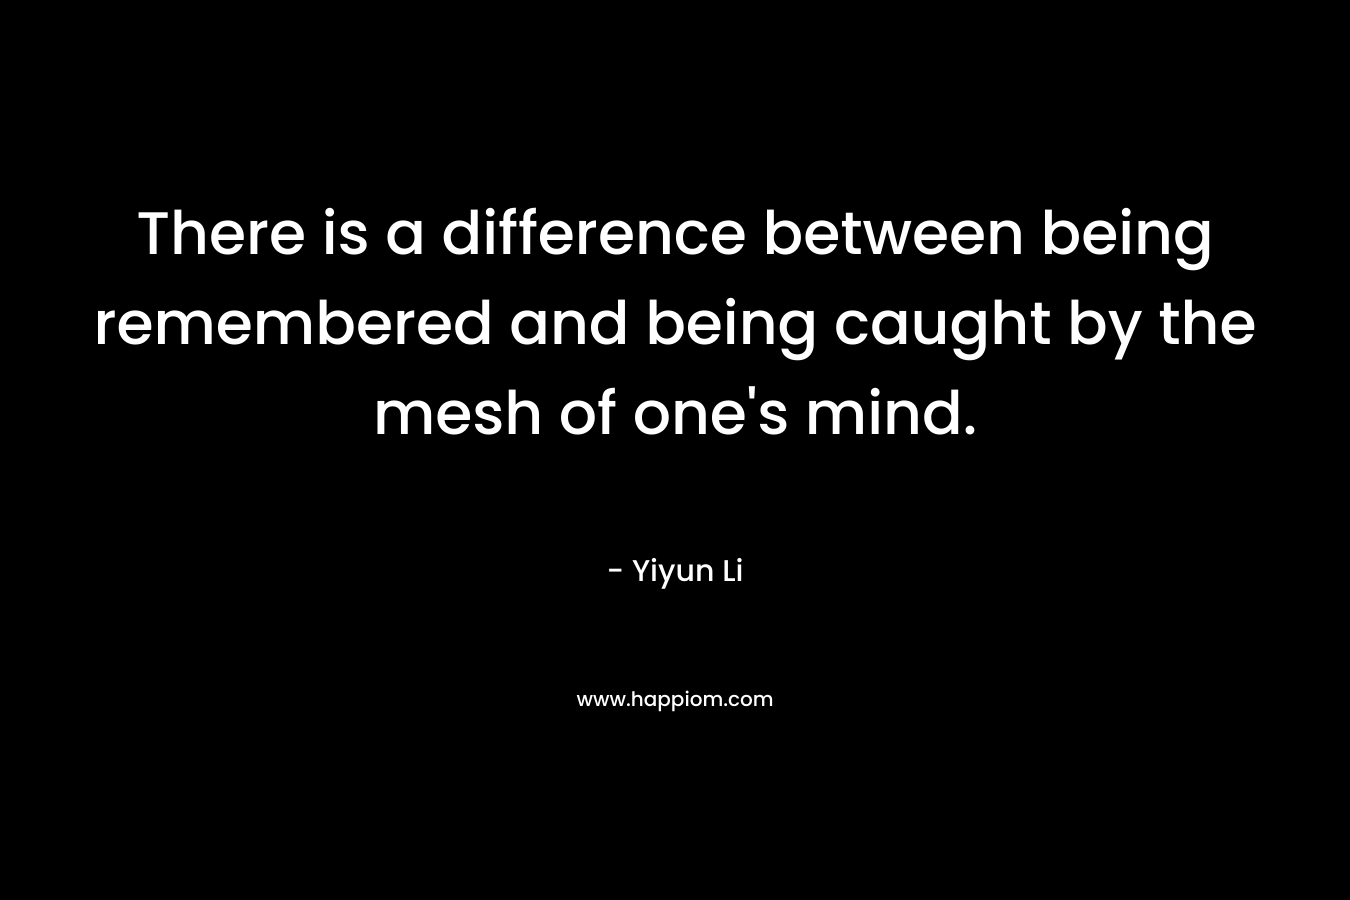 There is a difference between being remembered and being caught by the mesh of one's mind.